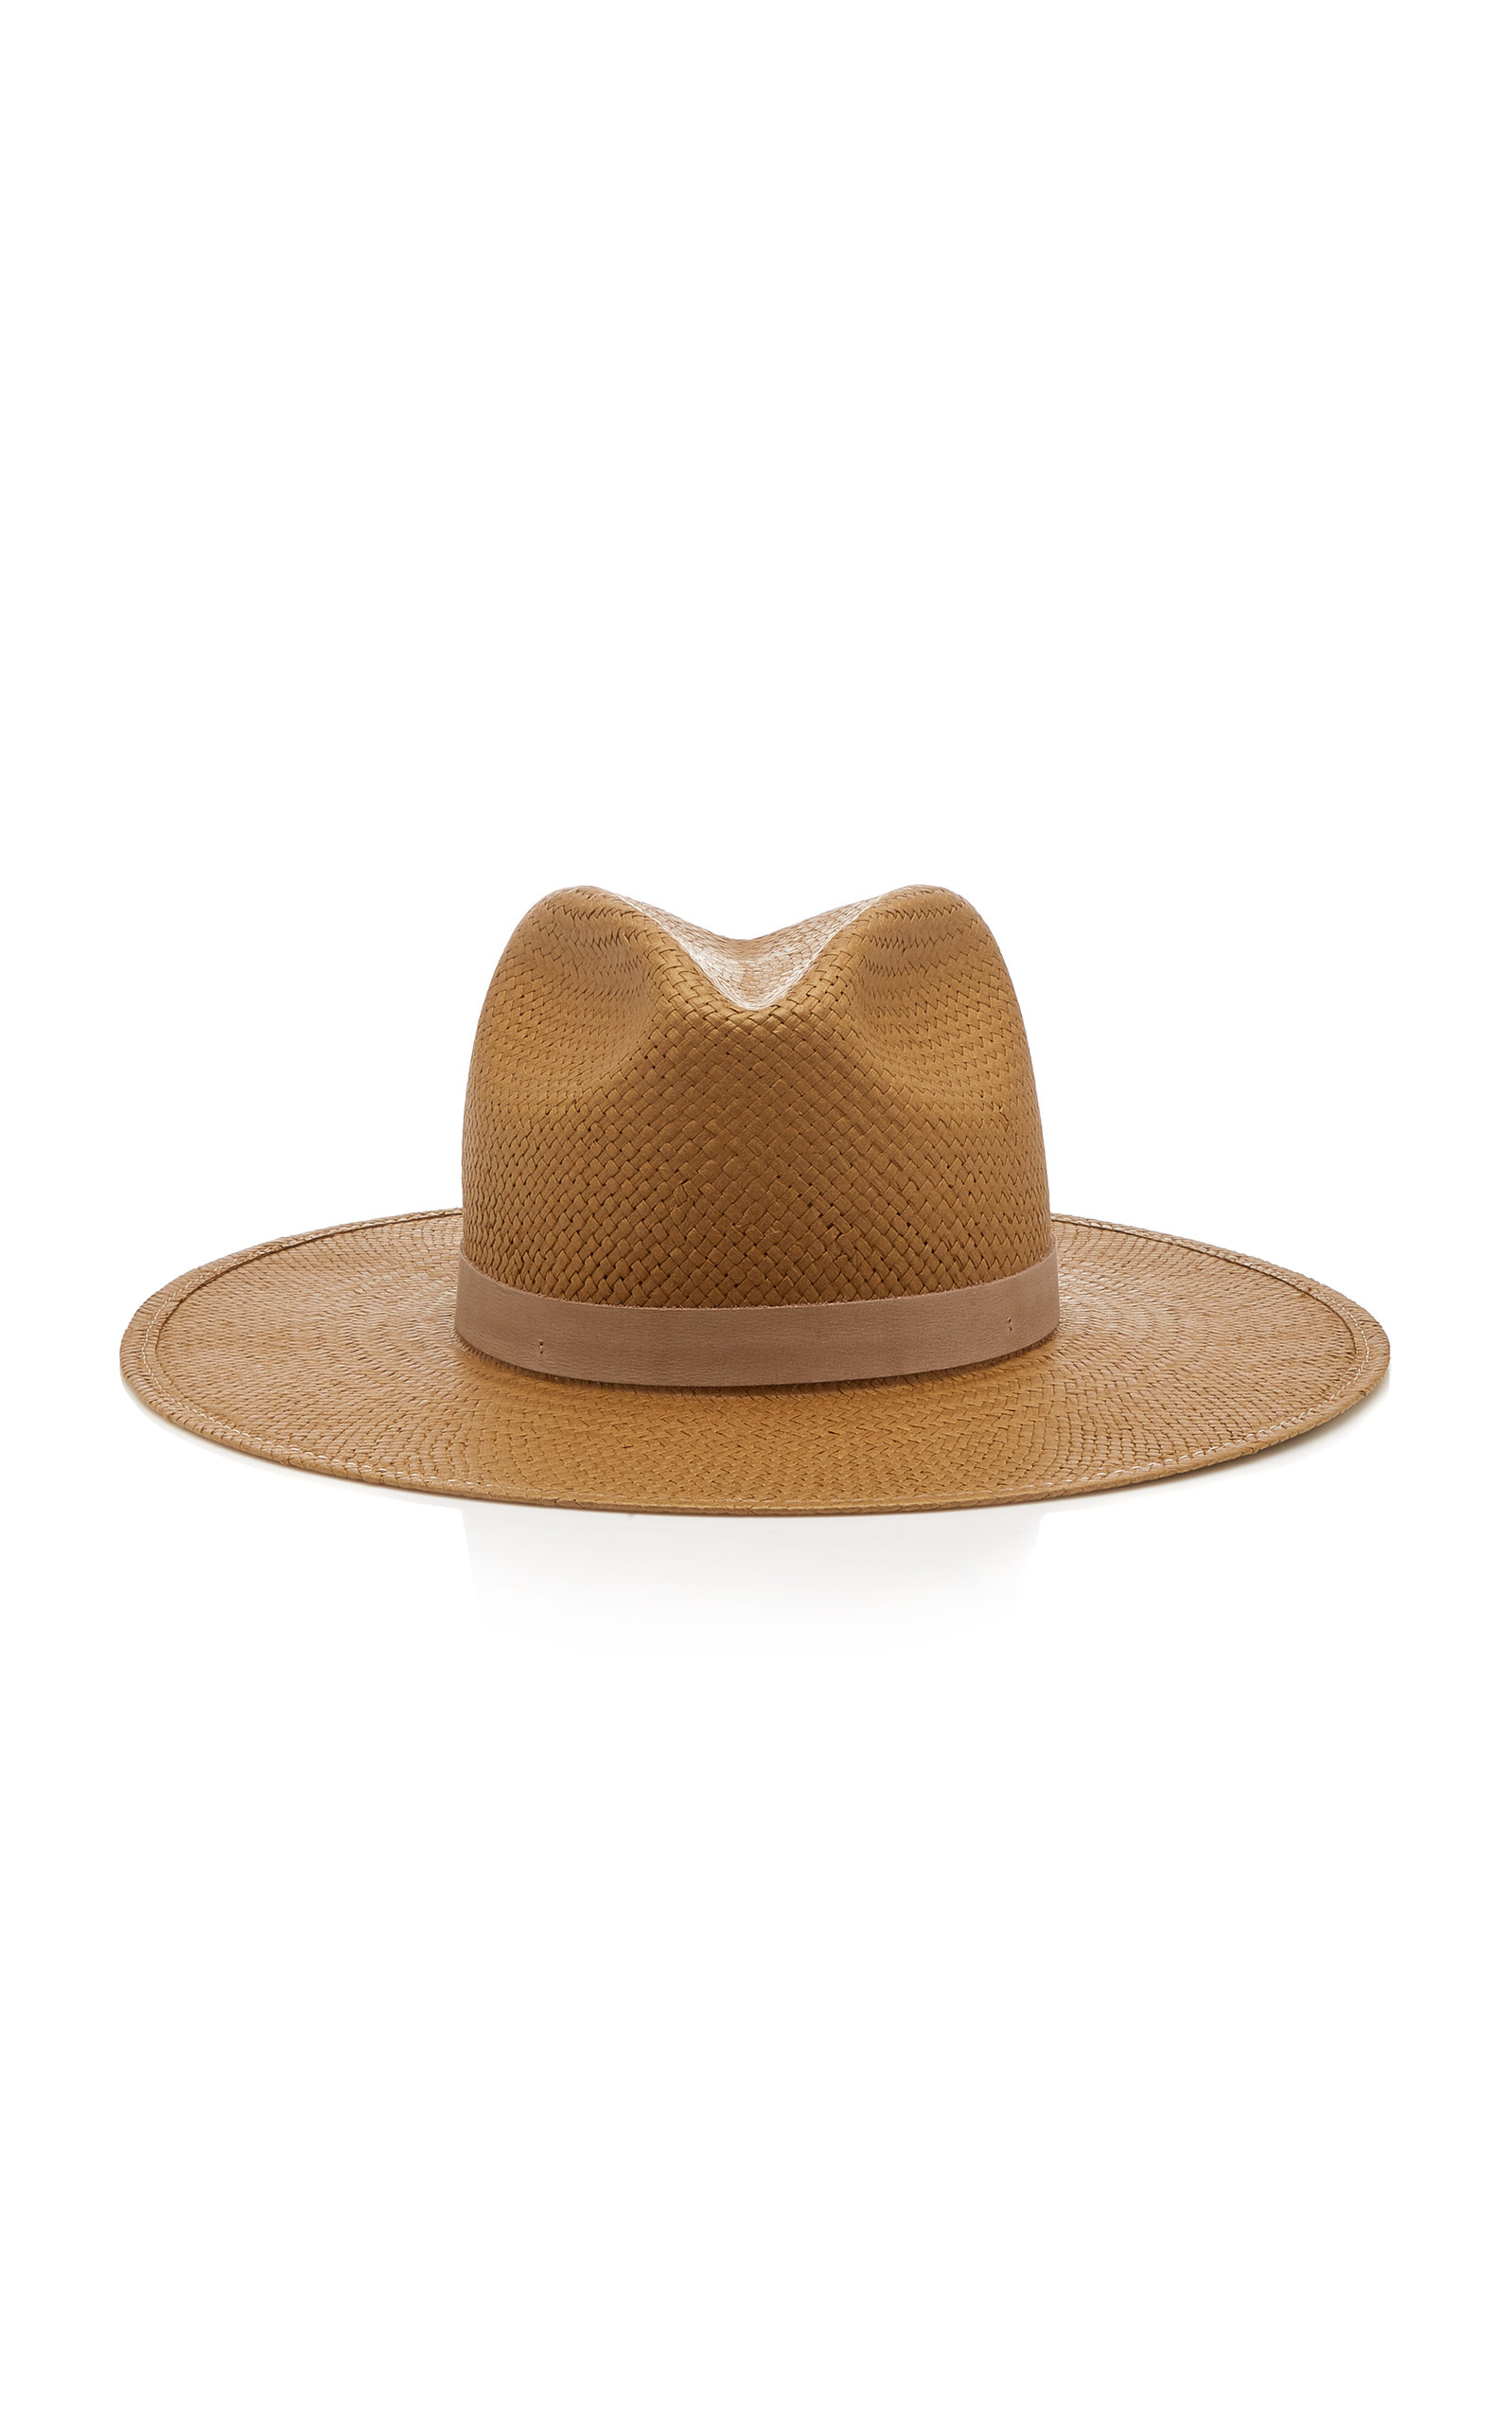 Adriana Packable Straw Hat